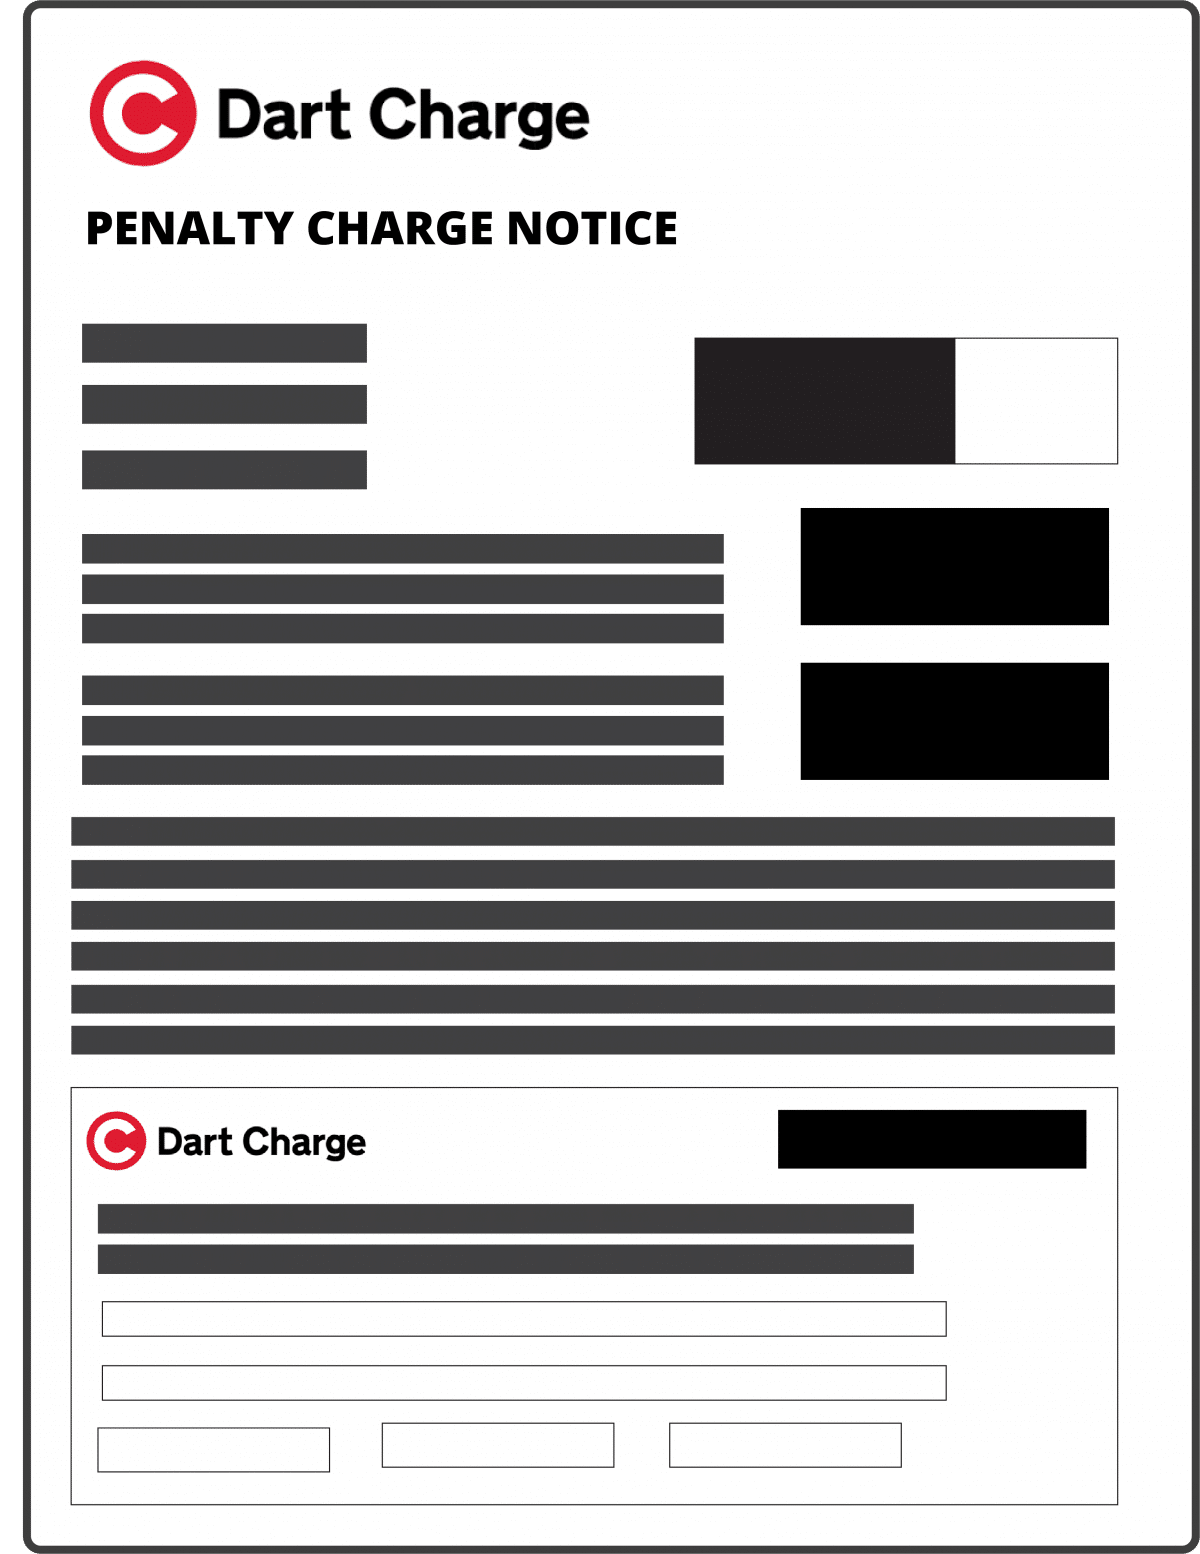 Graphic showing a Dart Charge Penalty Charge Notice (PCN)